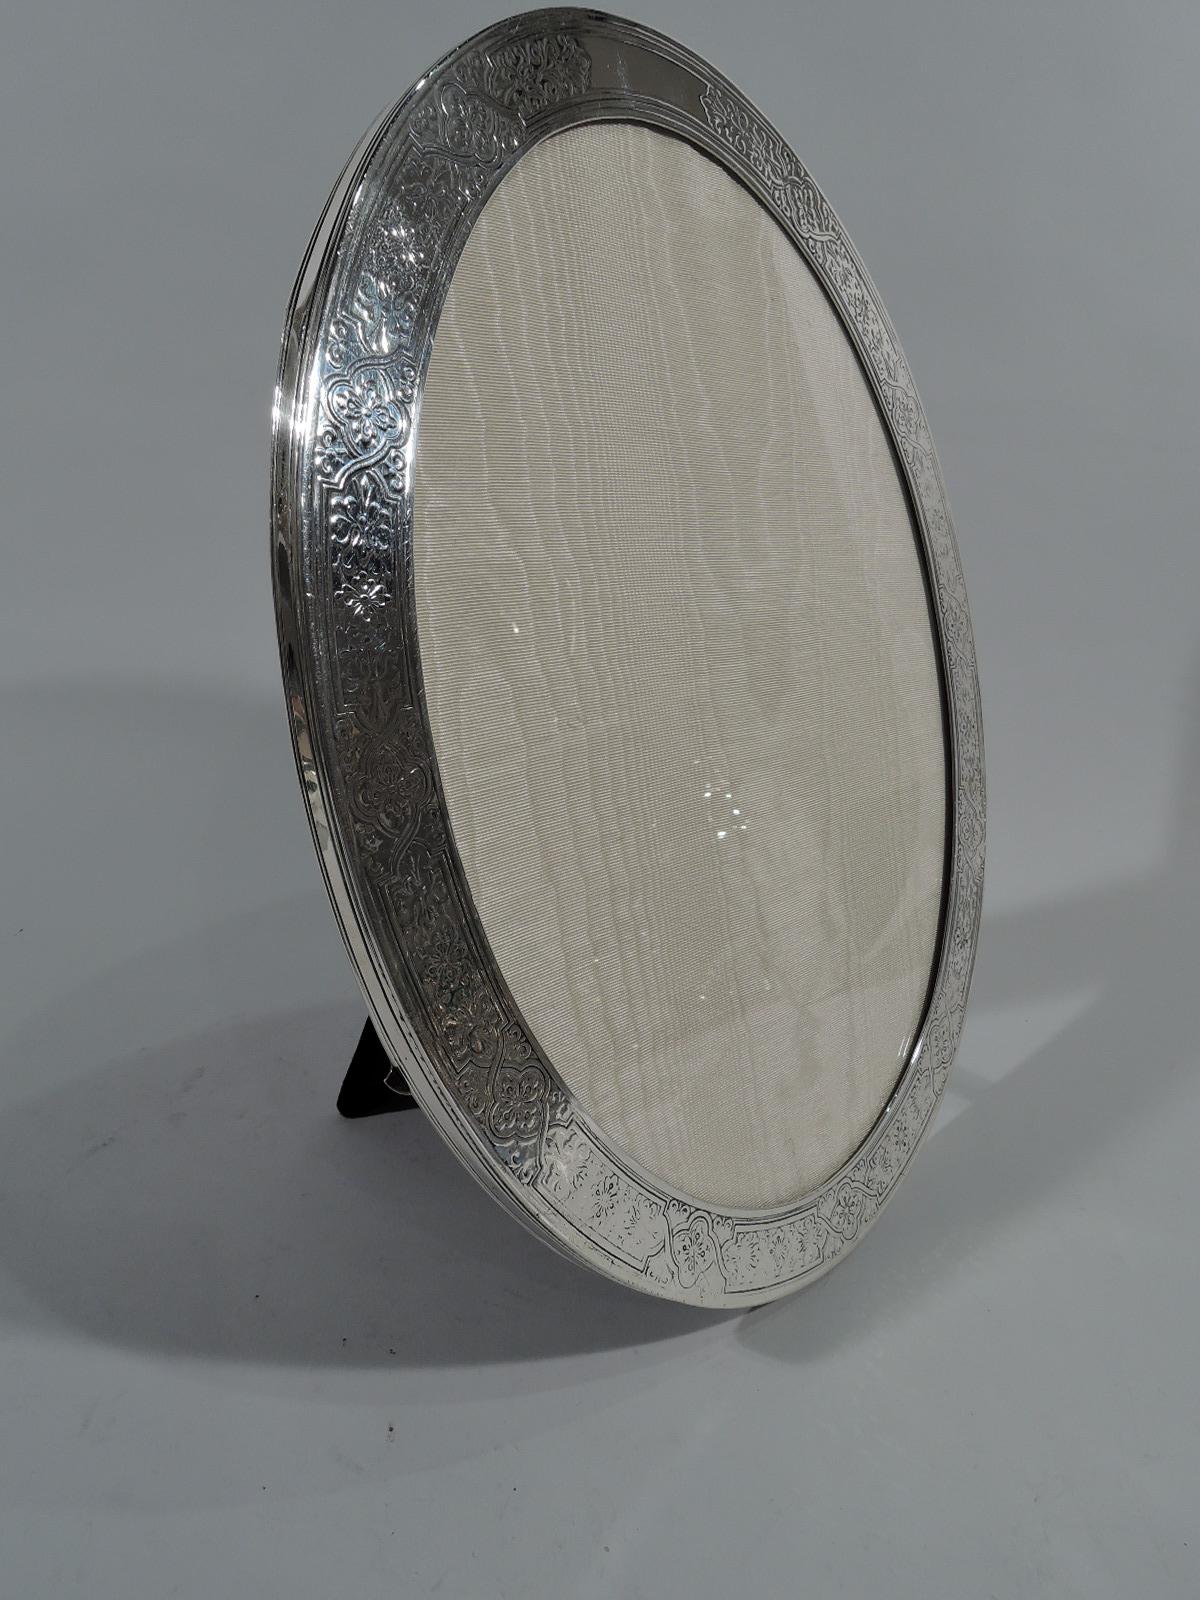 Art Nouveau sterling silver picture frame. Made by Tiffany & Co. in New York. Oval window and flat surround acid-etched with stylized flowers in curvilinear frames. Shaped cartouche (vacant). Sides have incised bands. With glass, silk lining, and